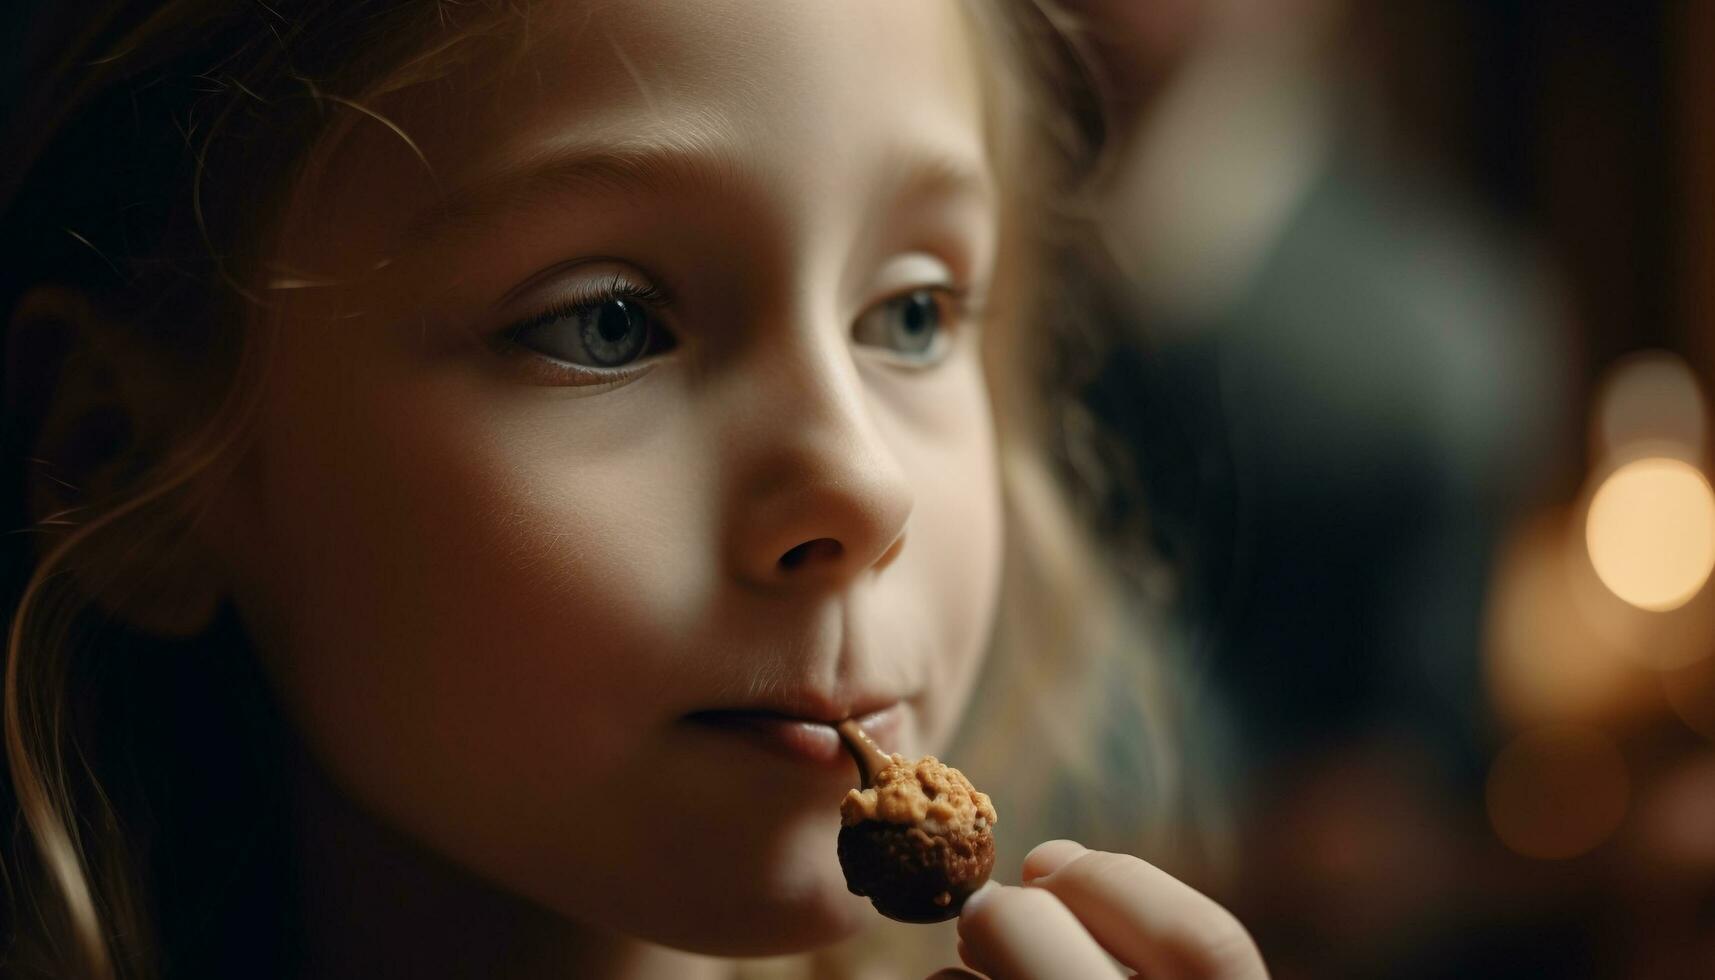 Smiling girl enjoying chocolate cookie indoors at night generated by AI photo